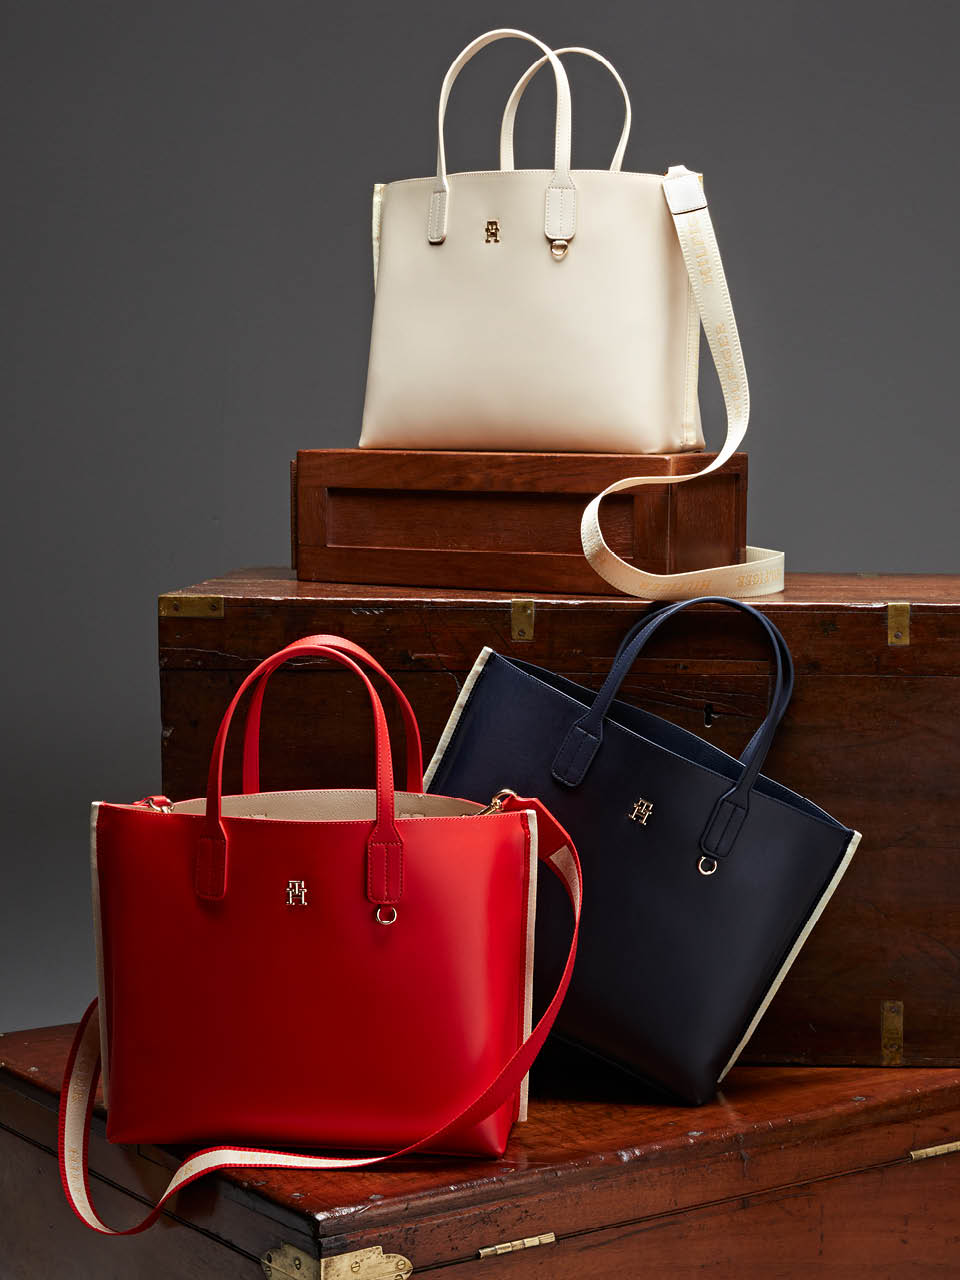 Tommy Hilfiger Women's Tote Bags & Satchel Bags